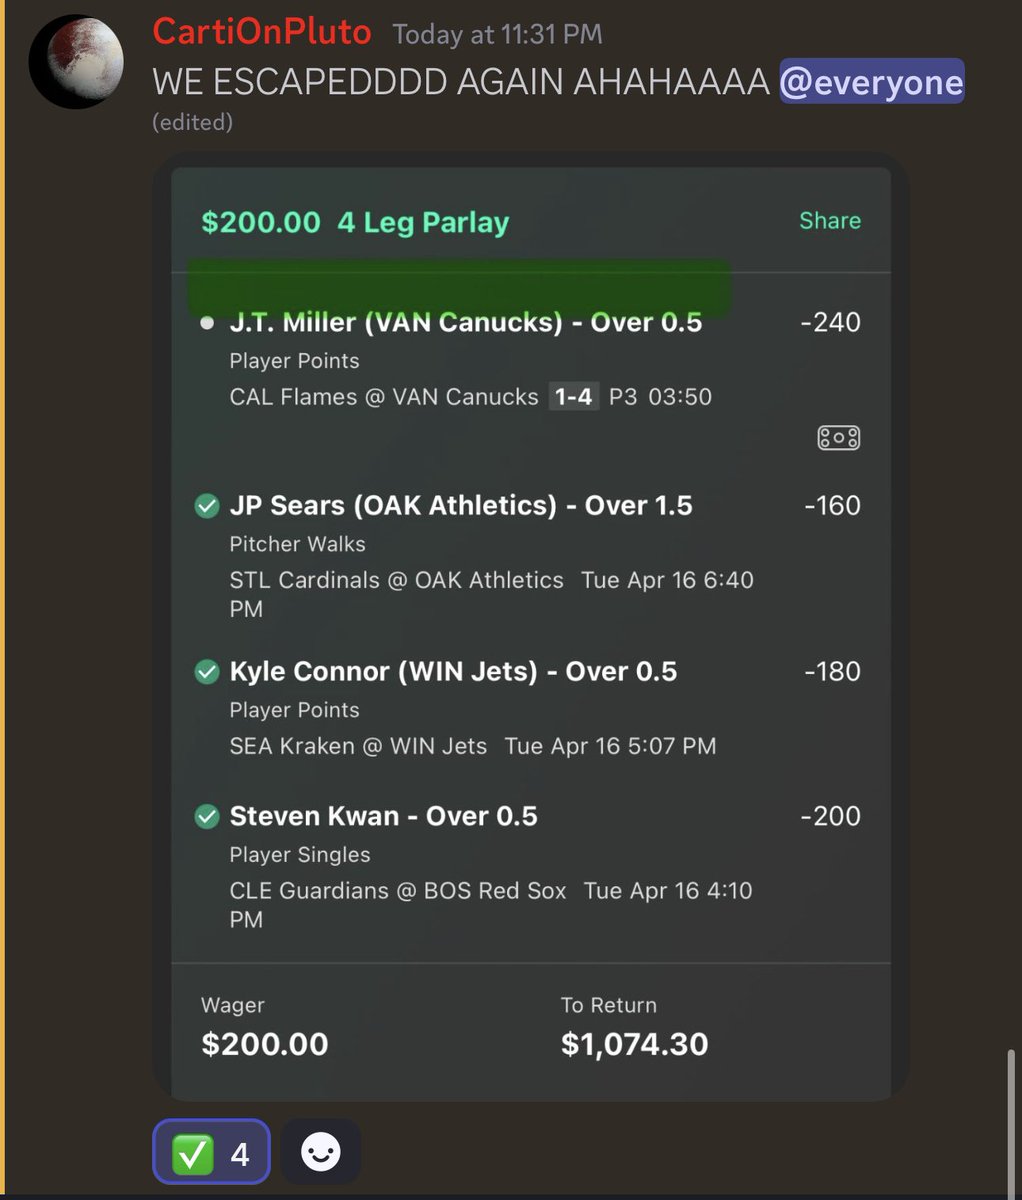 We Got The Best Mod Core Coming Up Everyone Smacked Today. 😮‍💨💰 

@PlutoSlips 
@EclazzBets 
@jhunxho71 
@Yfnraheem 
@chandler007

Discord: discord.gg/z2BRrs6Q8C

#DFS #chalkboard #prizepicks #gamblingtwitter #sportsbettingtwitter #KoatKlub #GamblingX #prizepicksMLB  #MLB